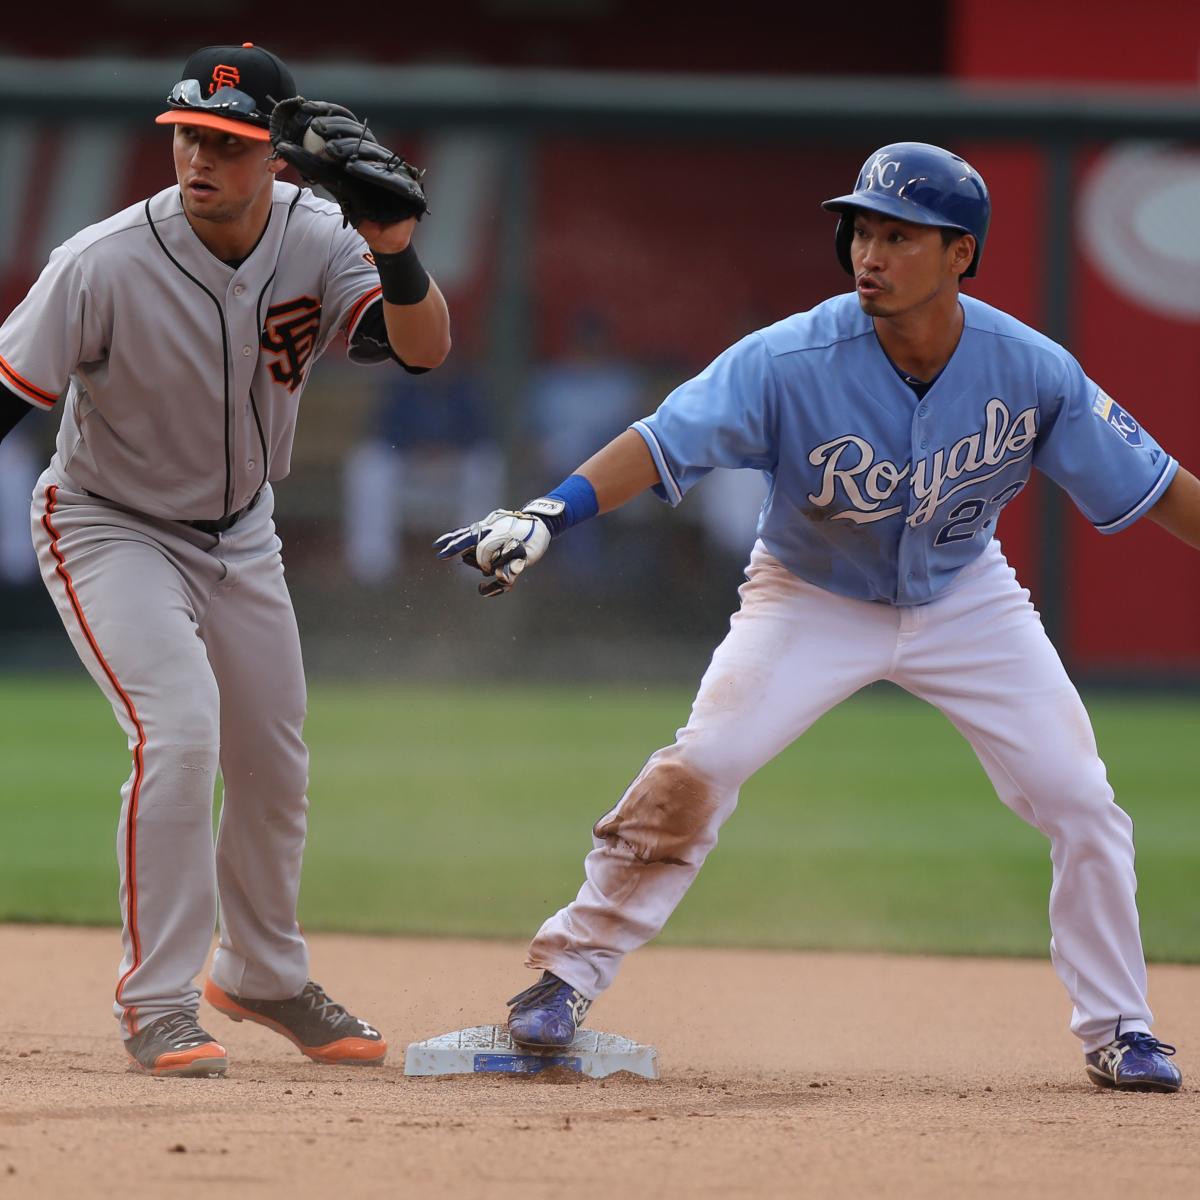 World Series 2014 Schedule: Full TV Info and Key Matchups in Royals vs. Giants